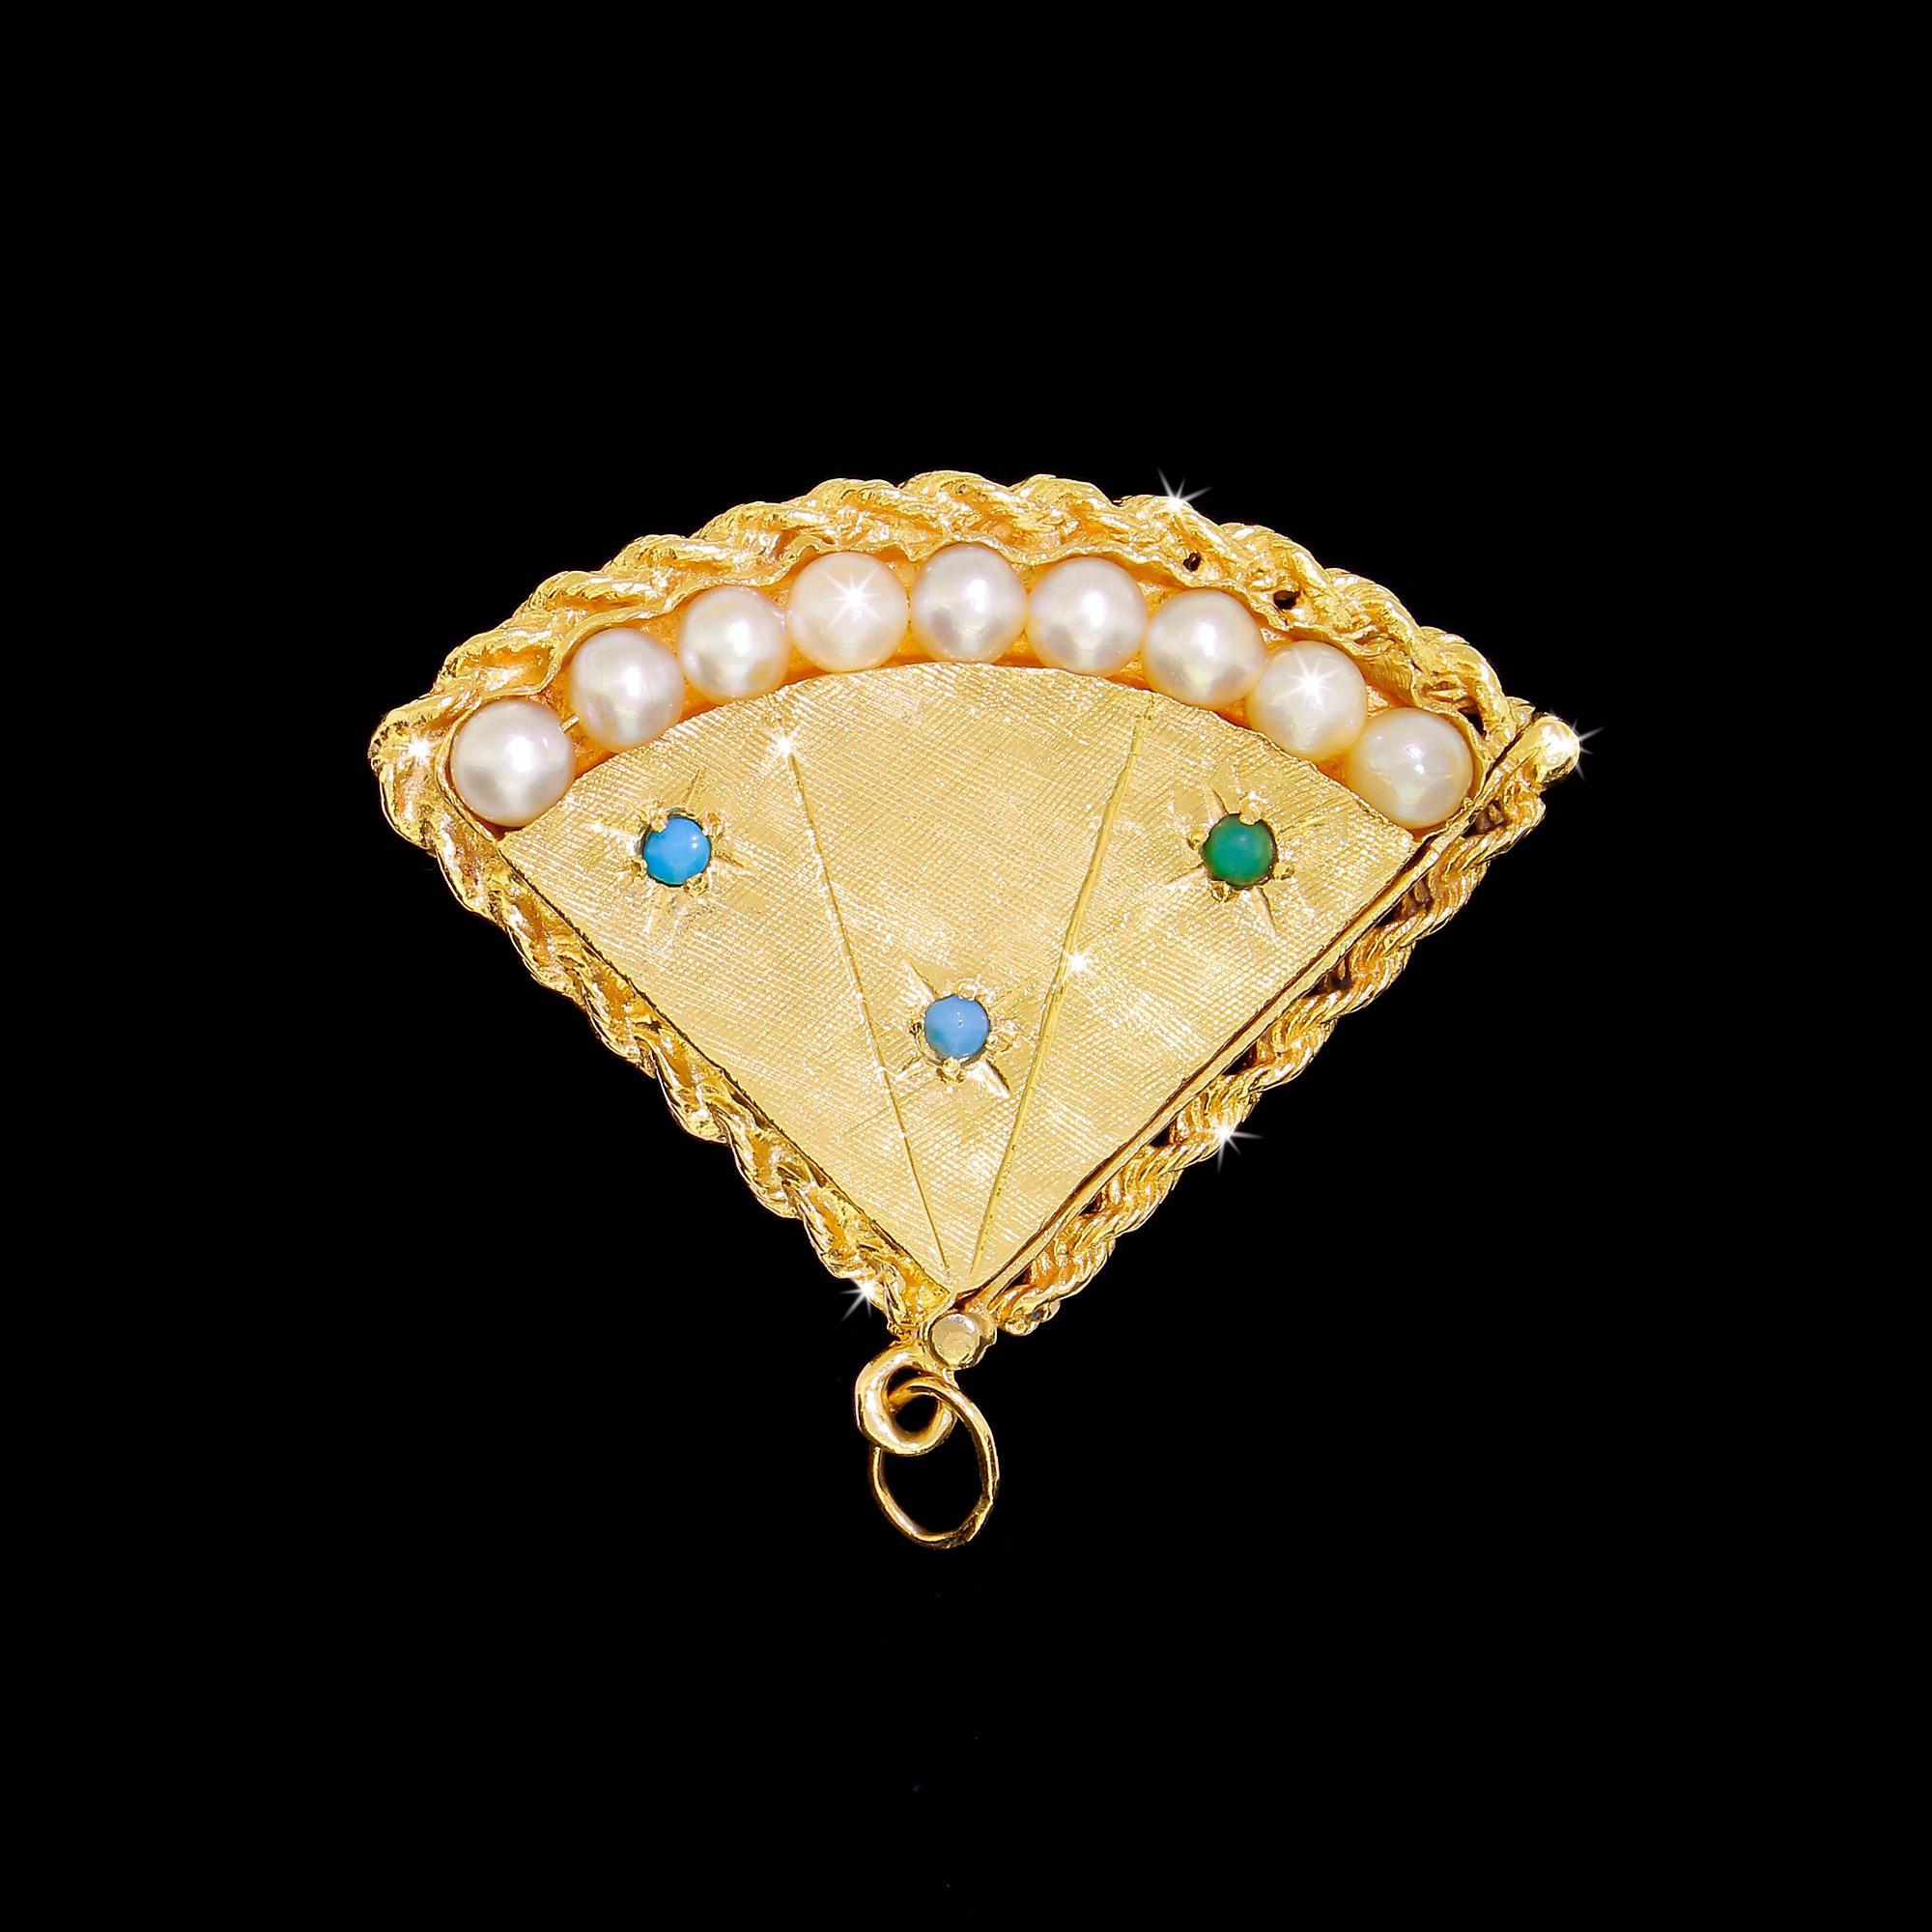 Large, heavy and quite unusual. This double-sided 14K solid gold fan-shaped locket features pearls and Persian turquoise stone accents. Beautiful detailing and superb craftsmanship indicate this pendant is the work of a master. Every surface has